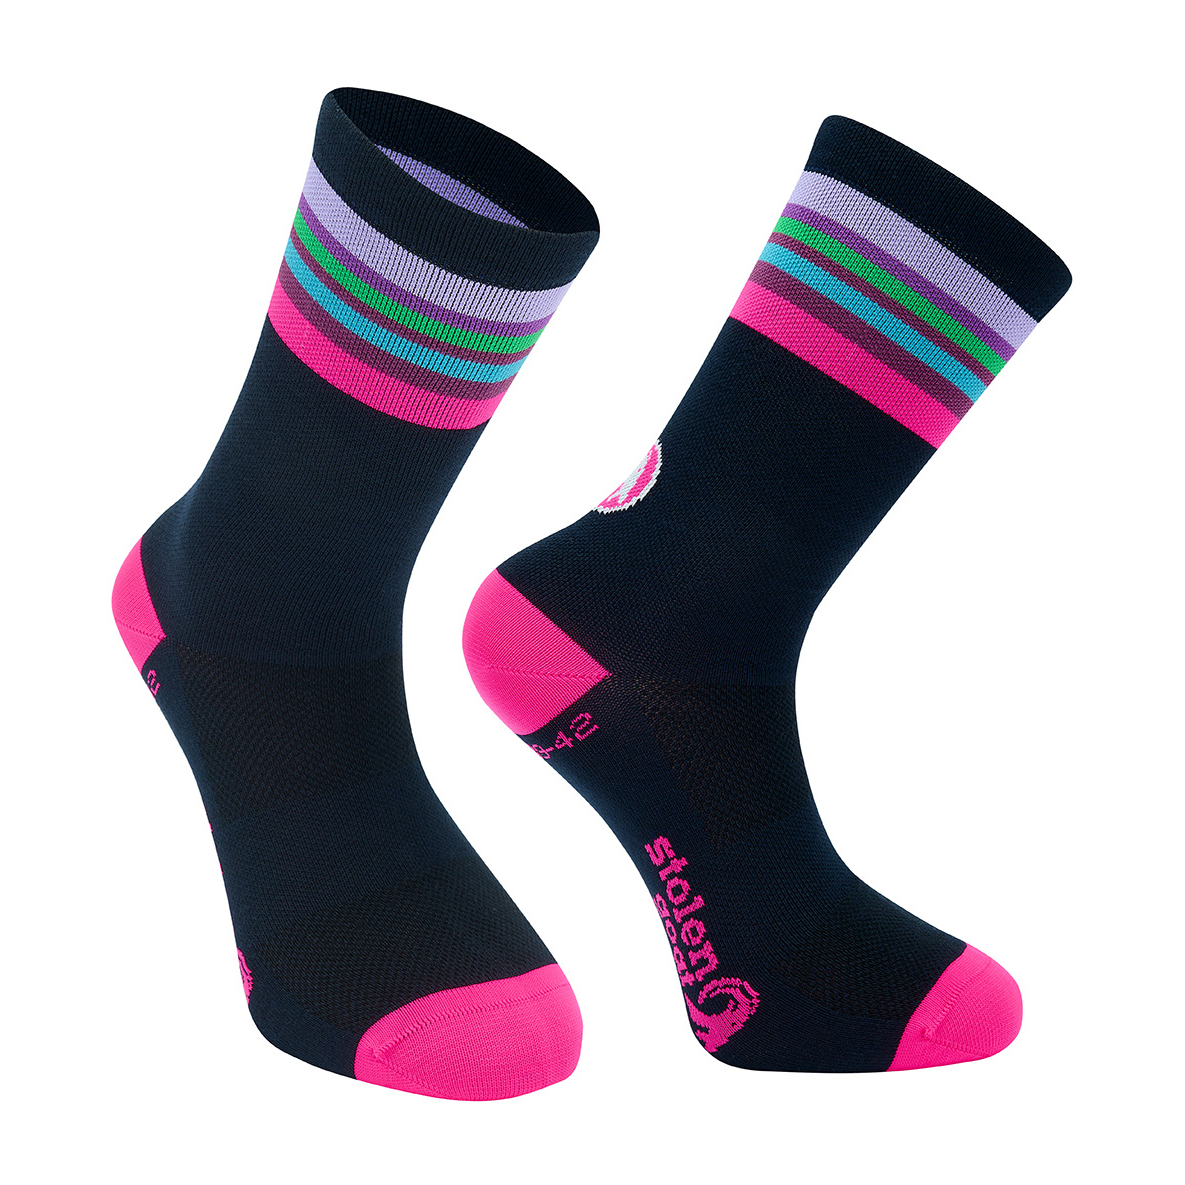 Stolen Goat Blast Coolmax cycling socks navy with pink toe and heel and pink purple green and blue stripe at ankle